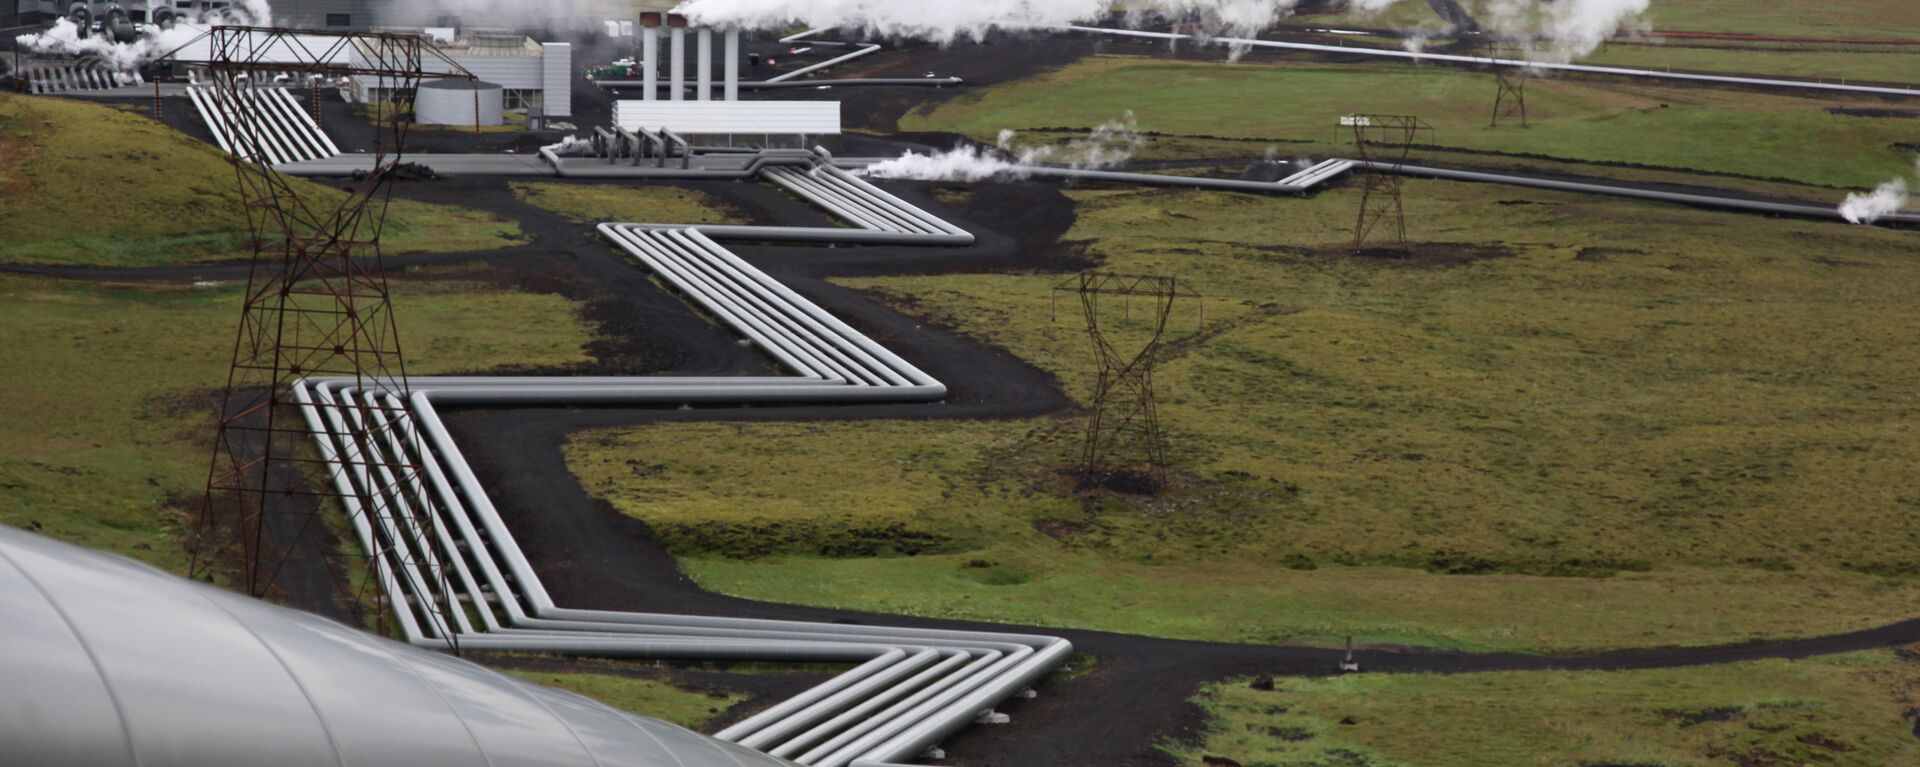 In this July 28, 2011 file photo, giant ducts carry superheated steam from within a volcanic field to the turbines at Reykjavik Energy's Hellisheidi geothermal power plant in Iceland. - Sputnik International, 1920, 29.06.2022